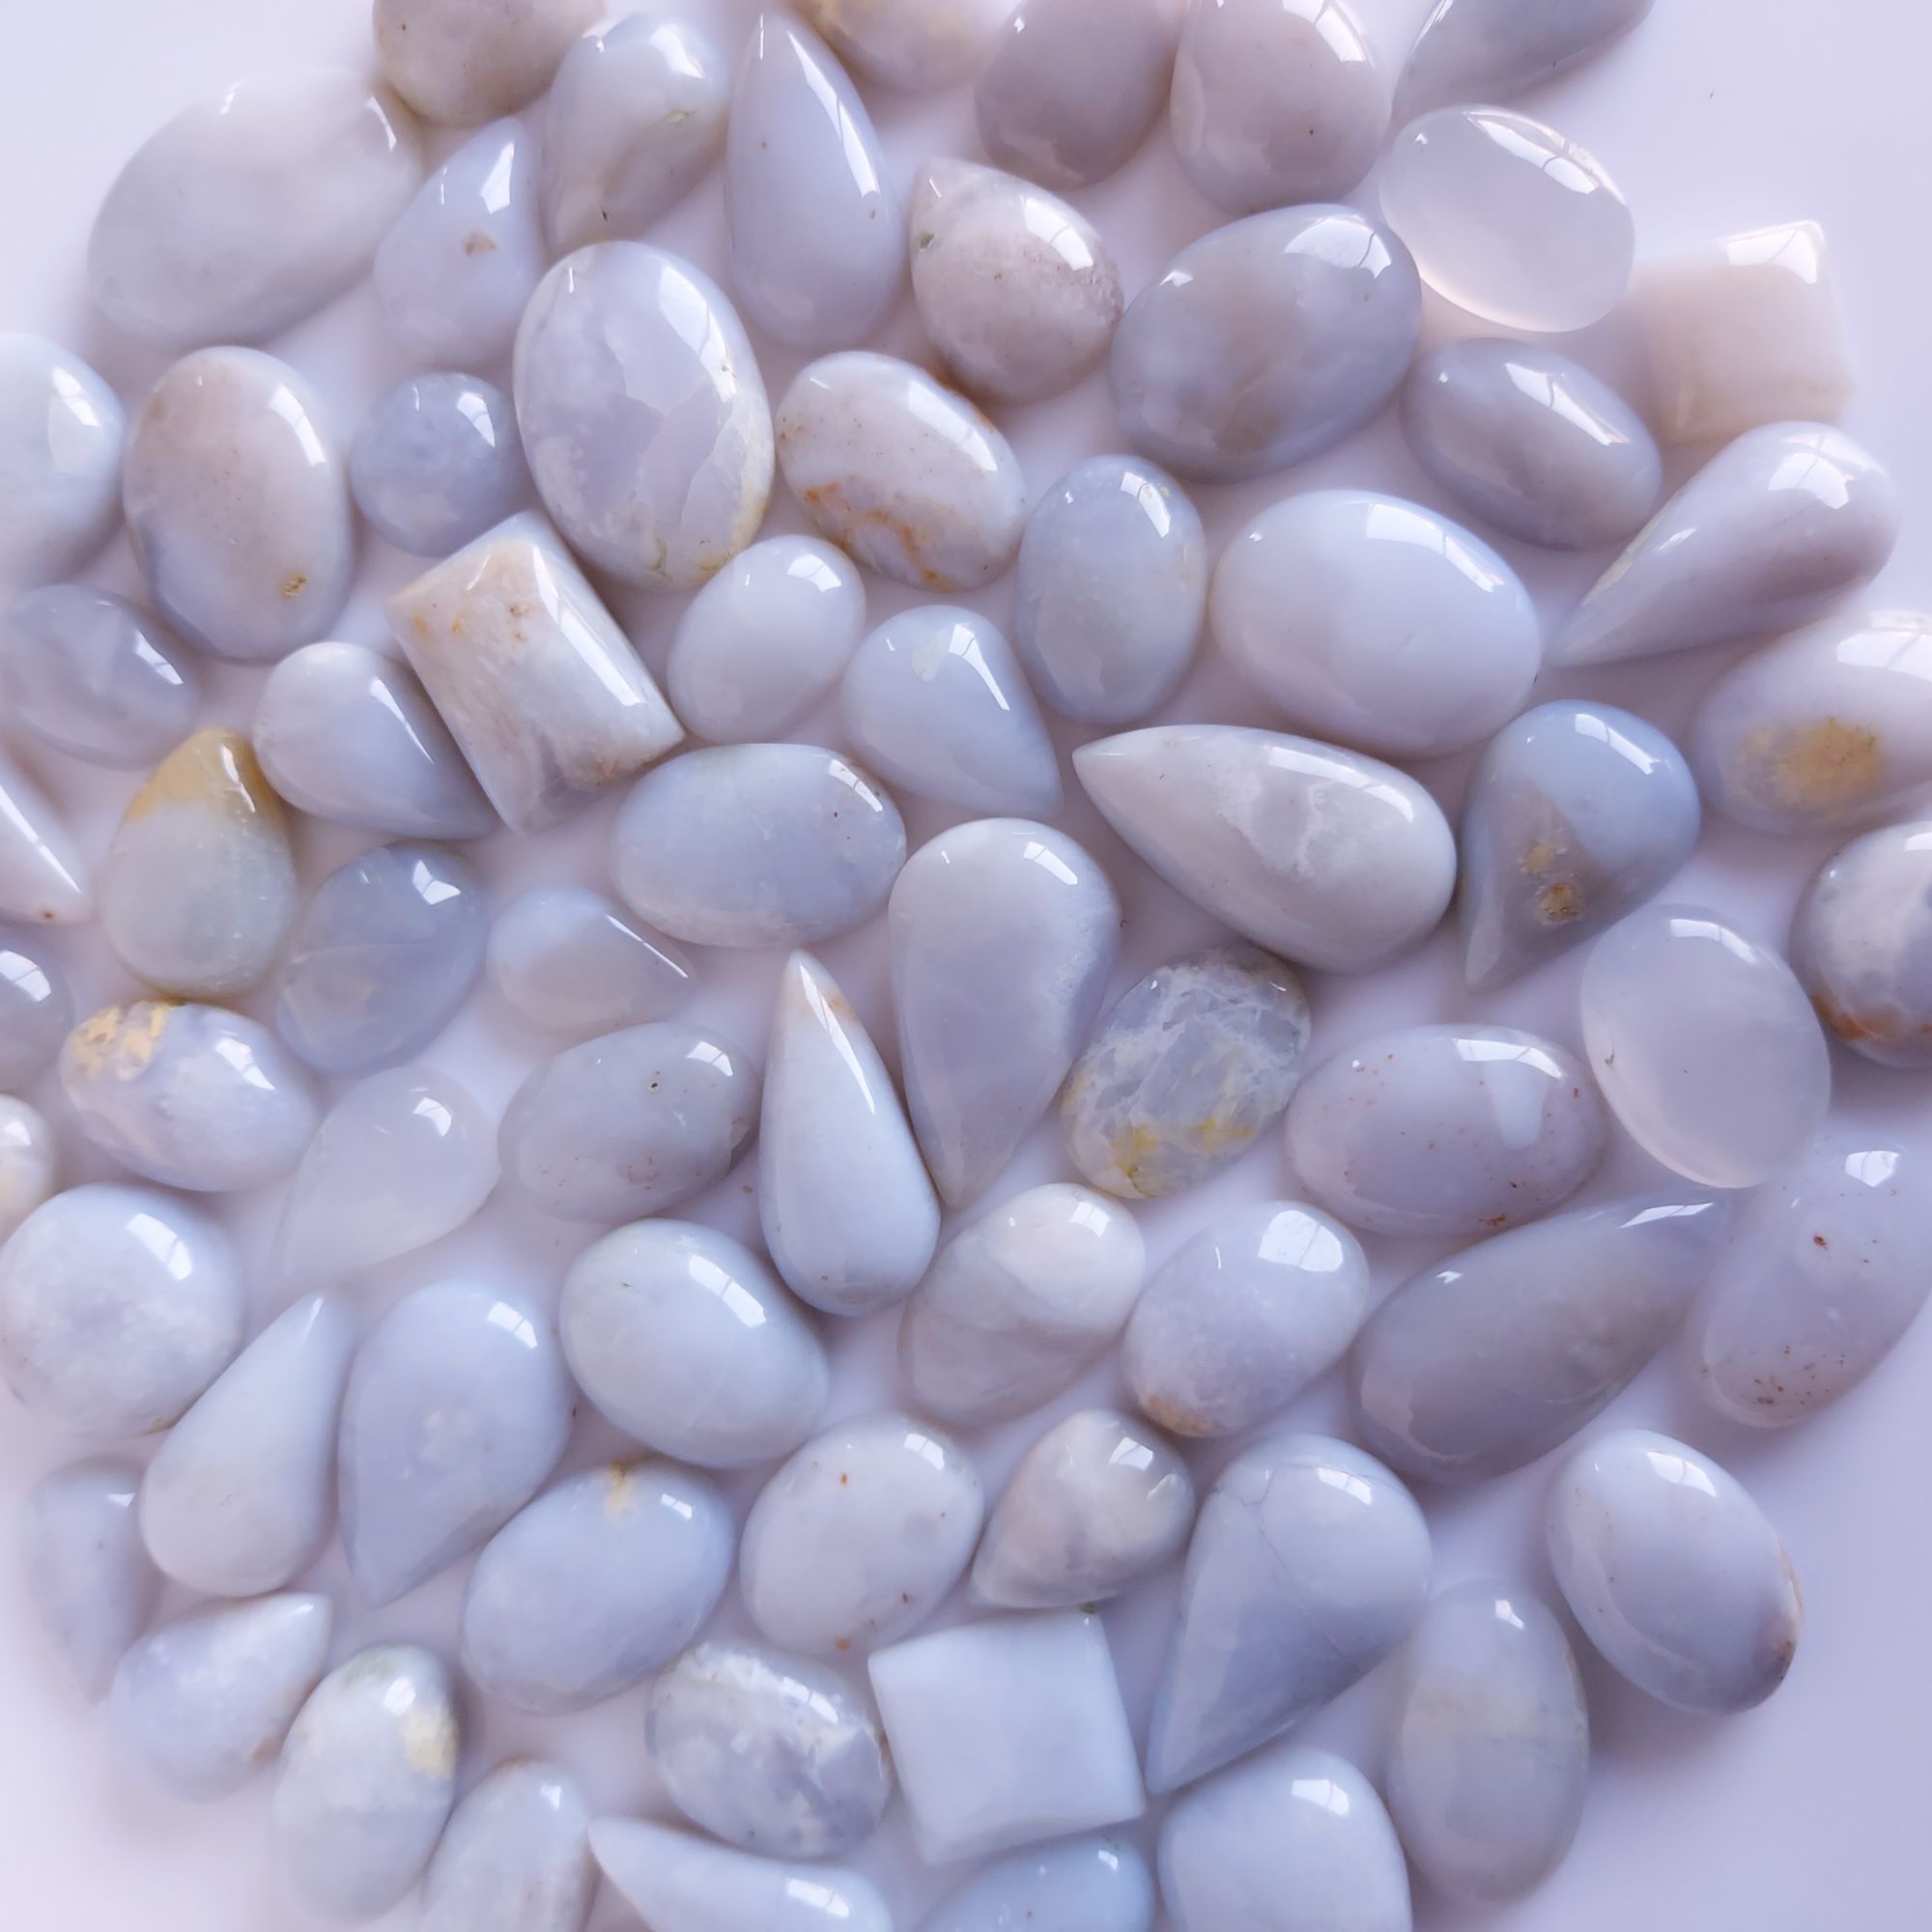 70 Pcs.1094 Cts Natural Blue Chalcedony Cabochon Loose Gemstone For Jewelry Wholesale Lot Size 29x20 18x12 mm